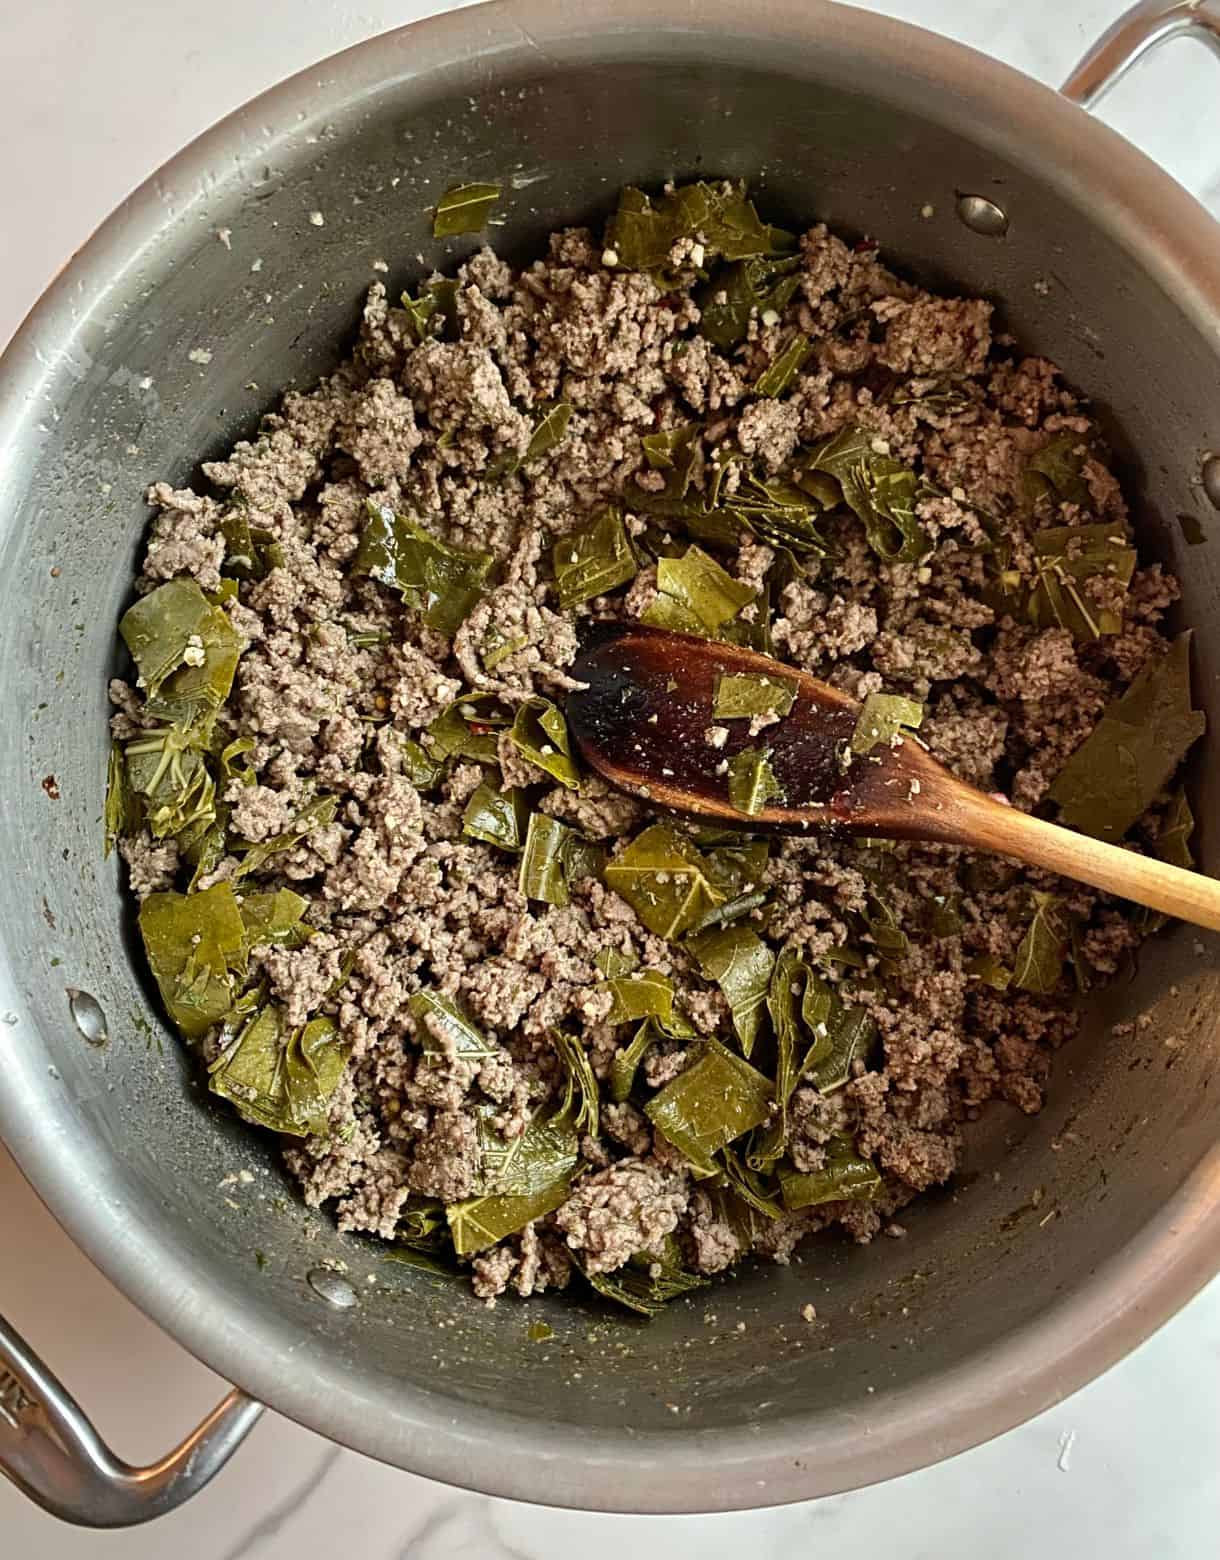 A pot of cooked and crumbled ground beef that is seasoned and has chopped grape leaves added.